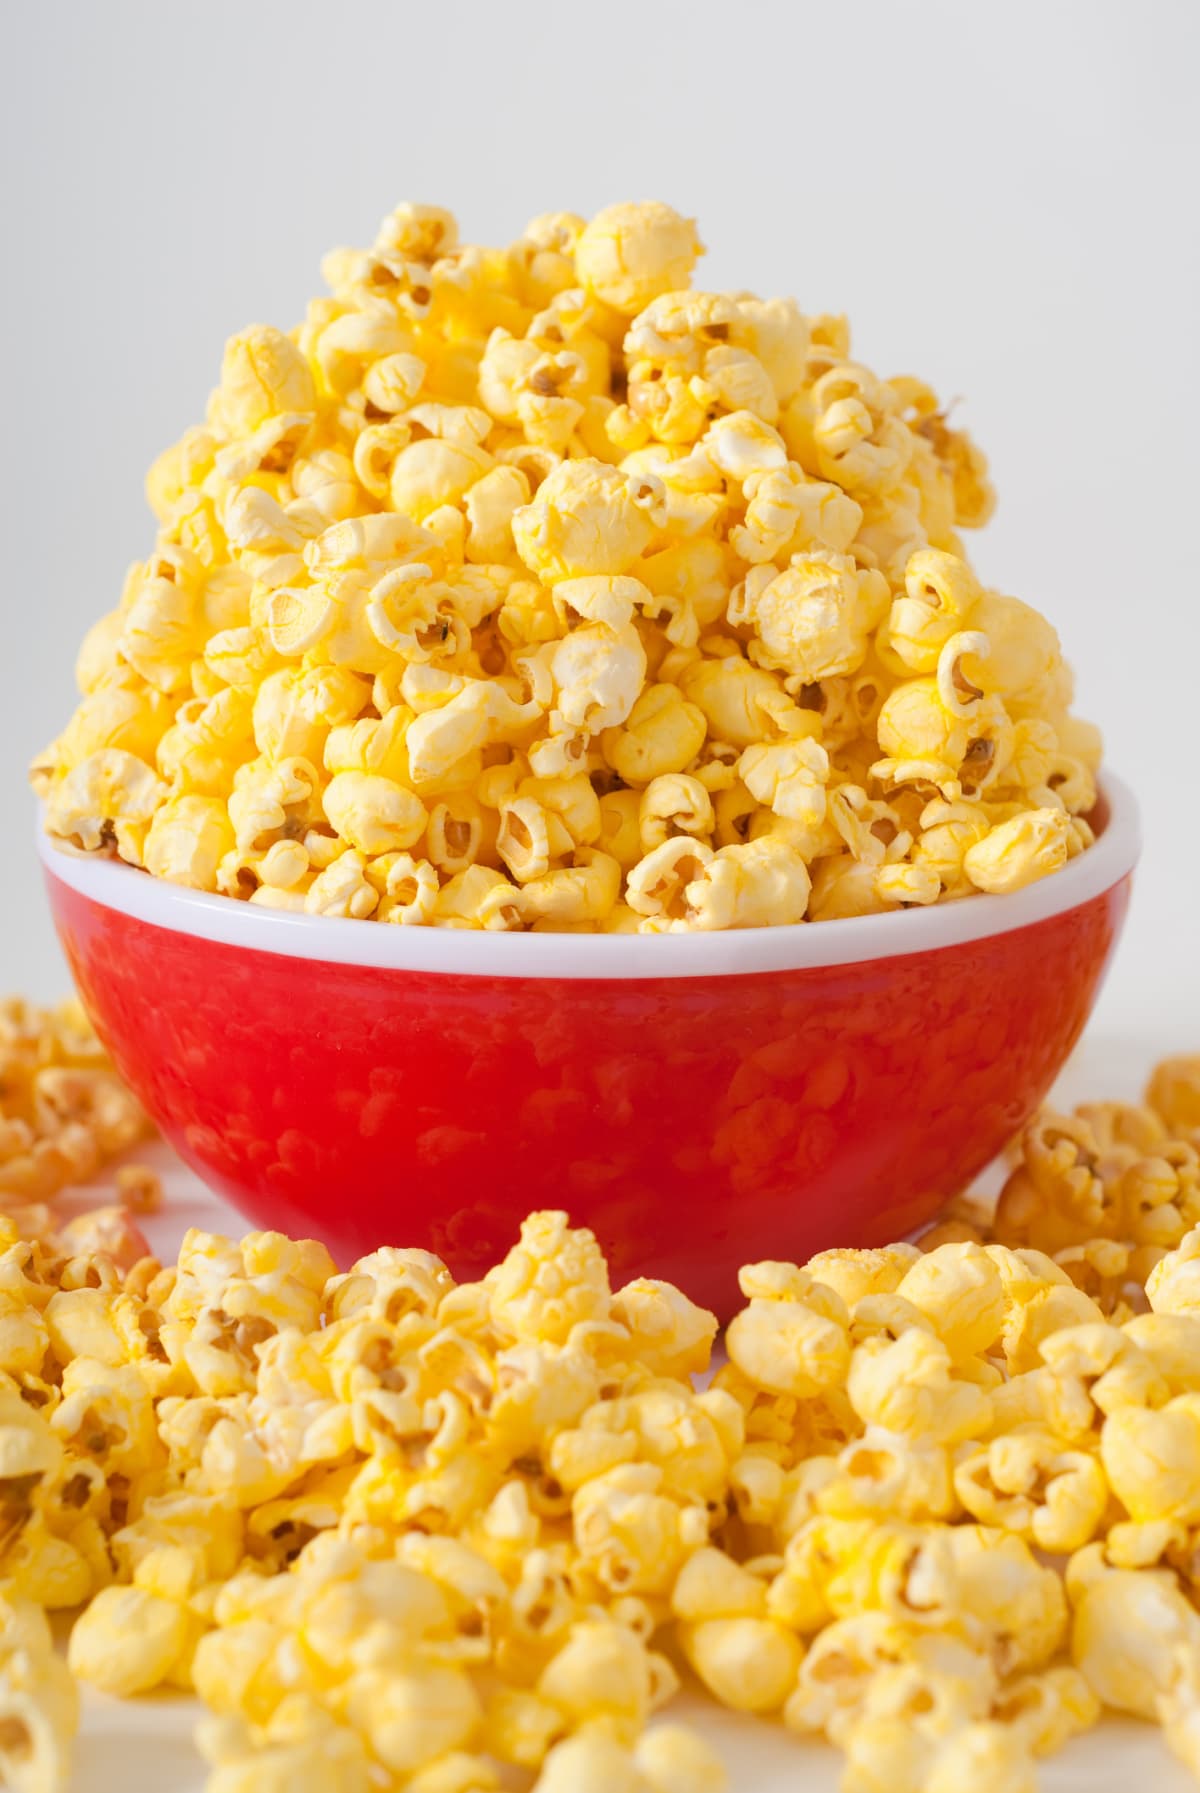 Red bowl filled with and surrounded by popcorn